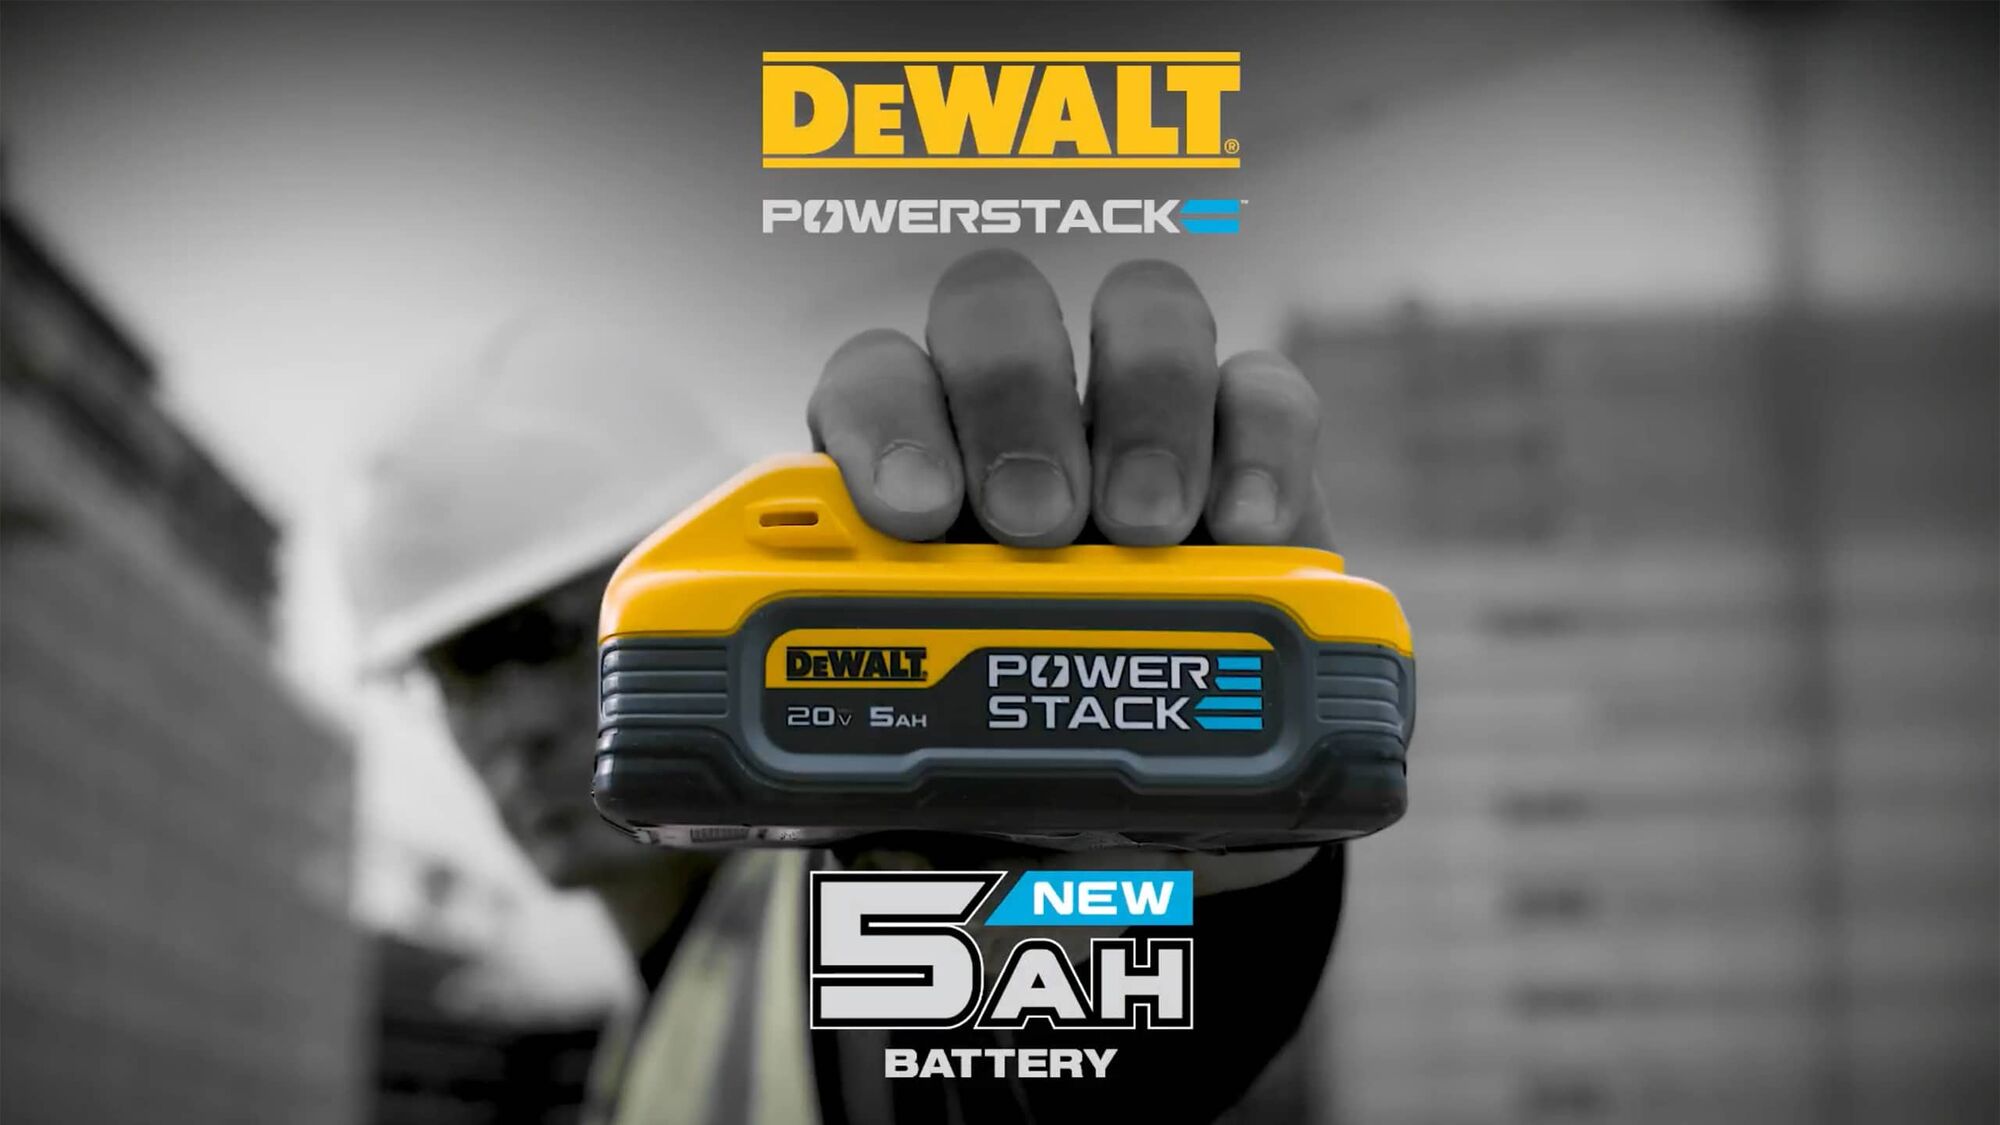 dewalt powerstack five amp hour battery held by a user on a jobsite with on screen text reading new five amp hour battery